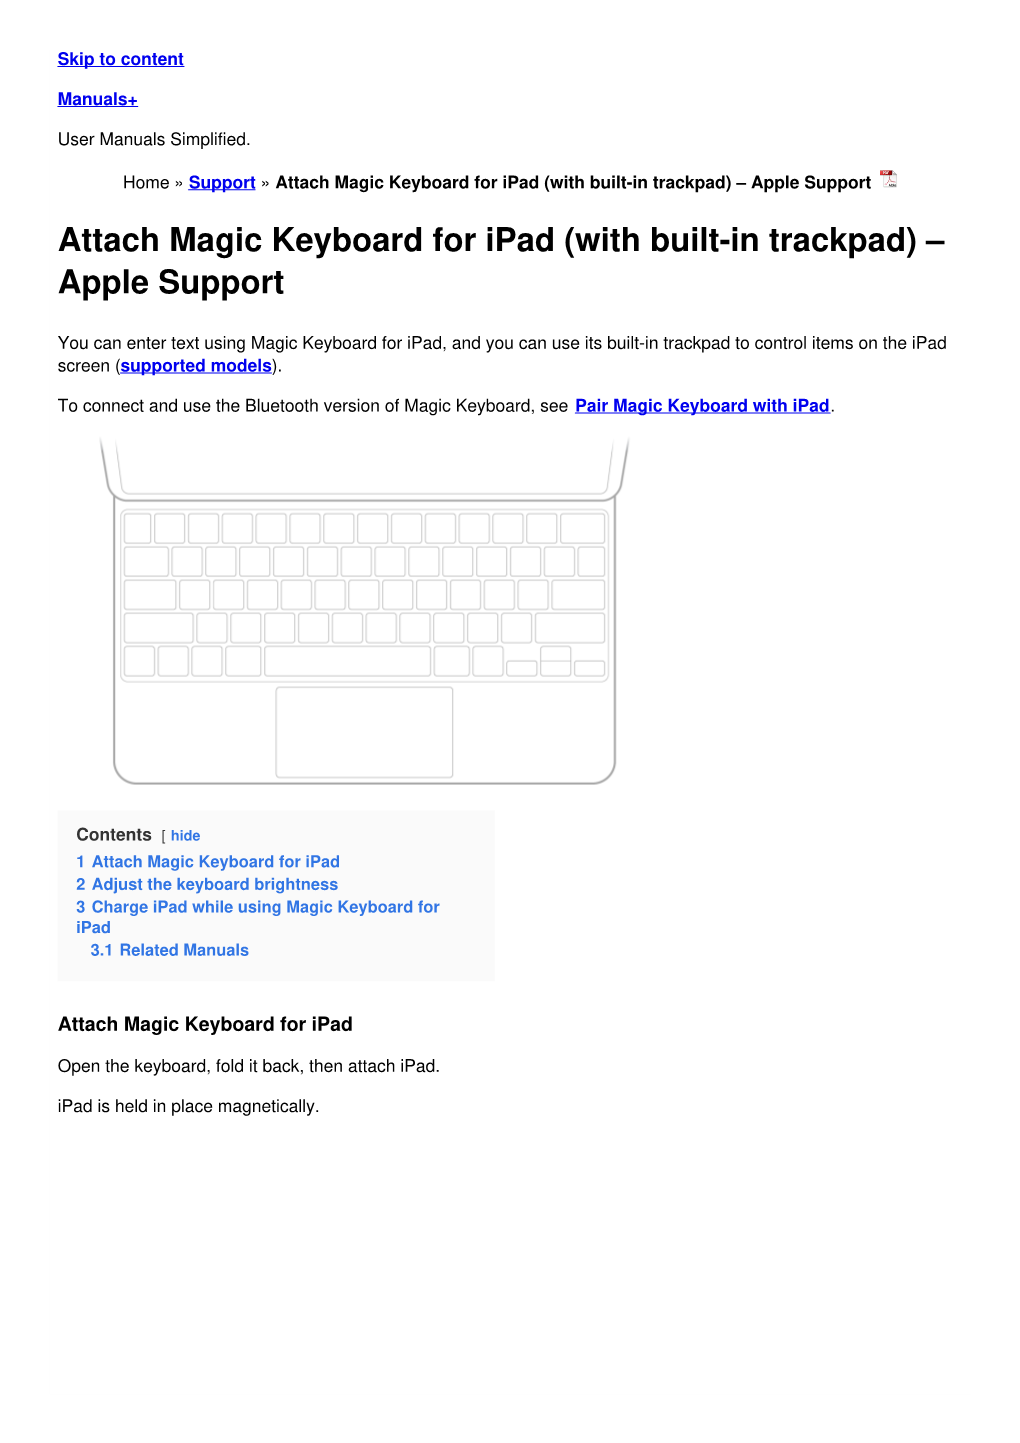 Attach Magic Keyboard for Ipad (With Built-In Trackpad) – Apple Support